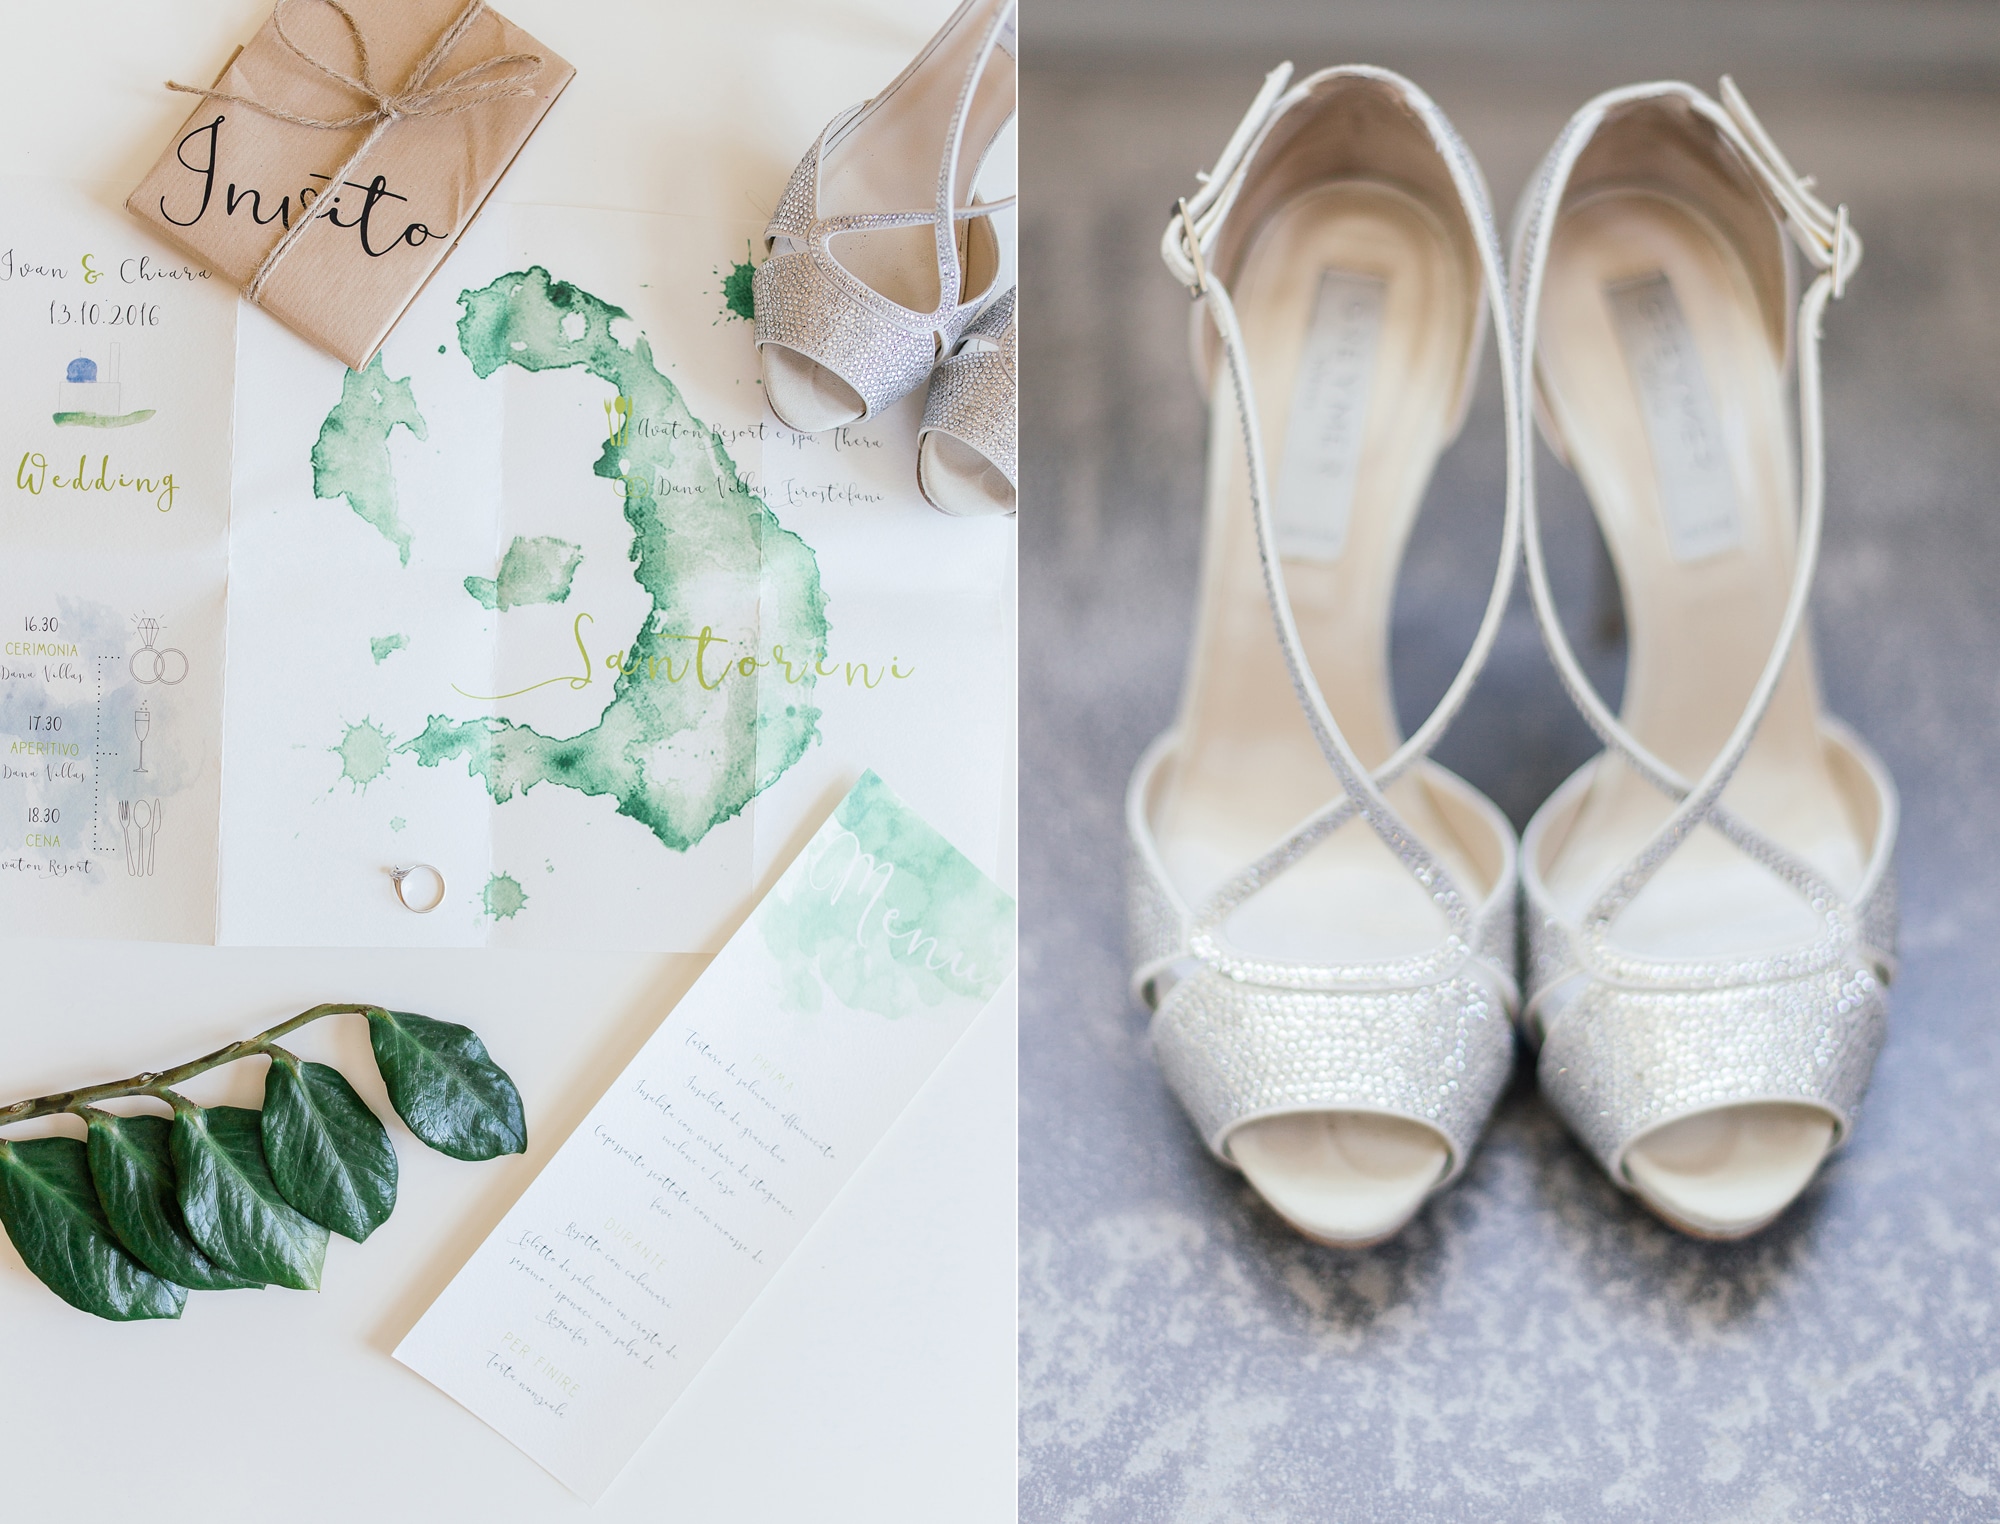 Silver wedding shoes and craft wedding invitation